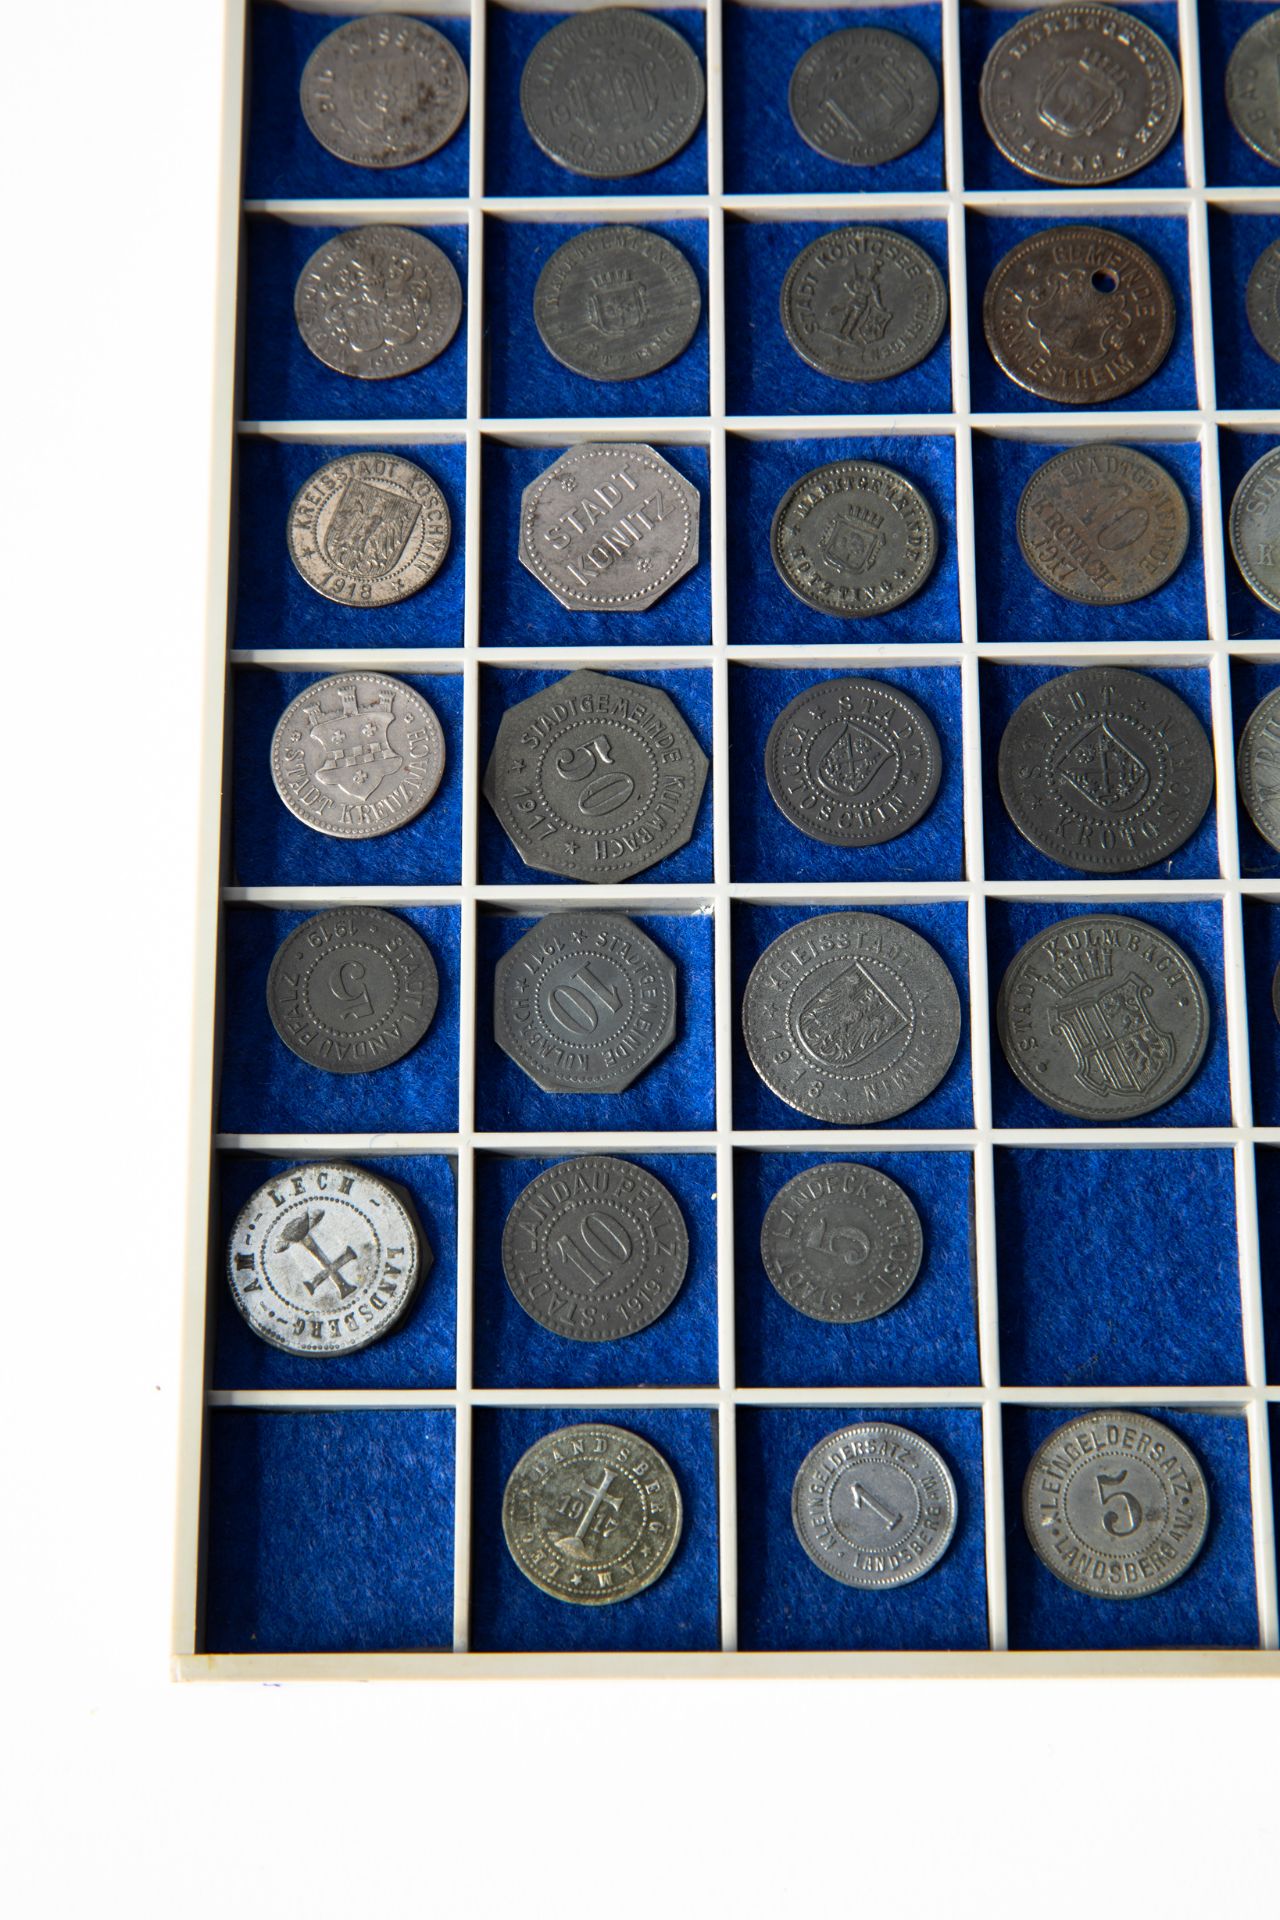 Emergency coins Germany cities from H-L, 245 pieces - Bild 3 aus 22